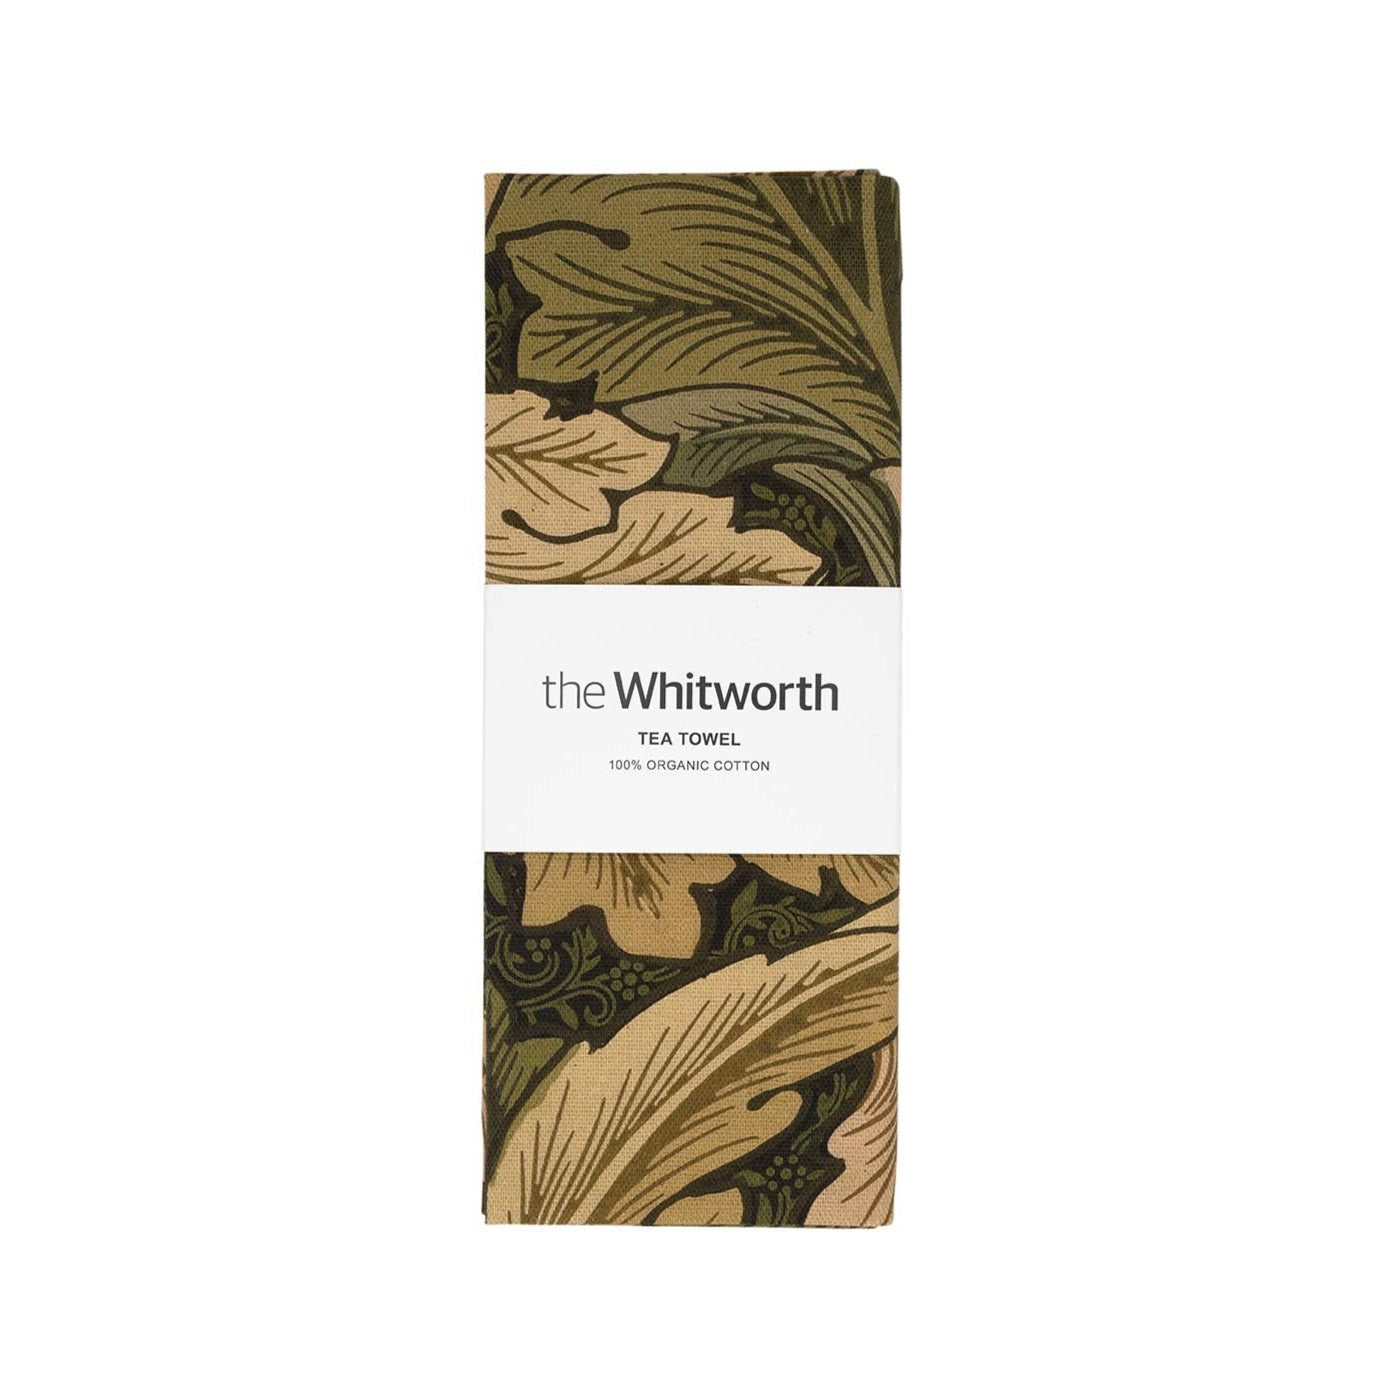 Tea towel featuring William Morris Acanthus leafy pattern. Wrapped around the tea towel is a belly band with the Whitworth's branding on it. White background.